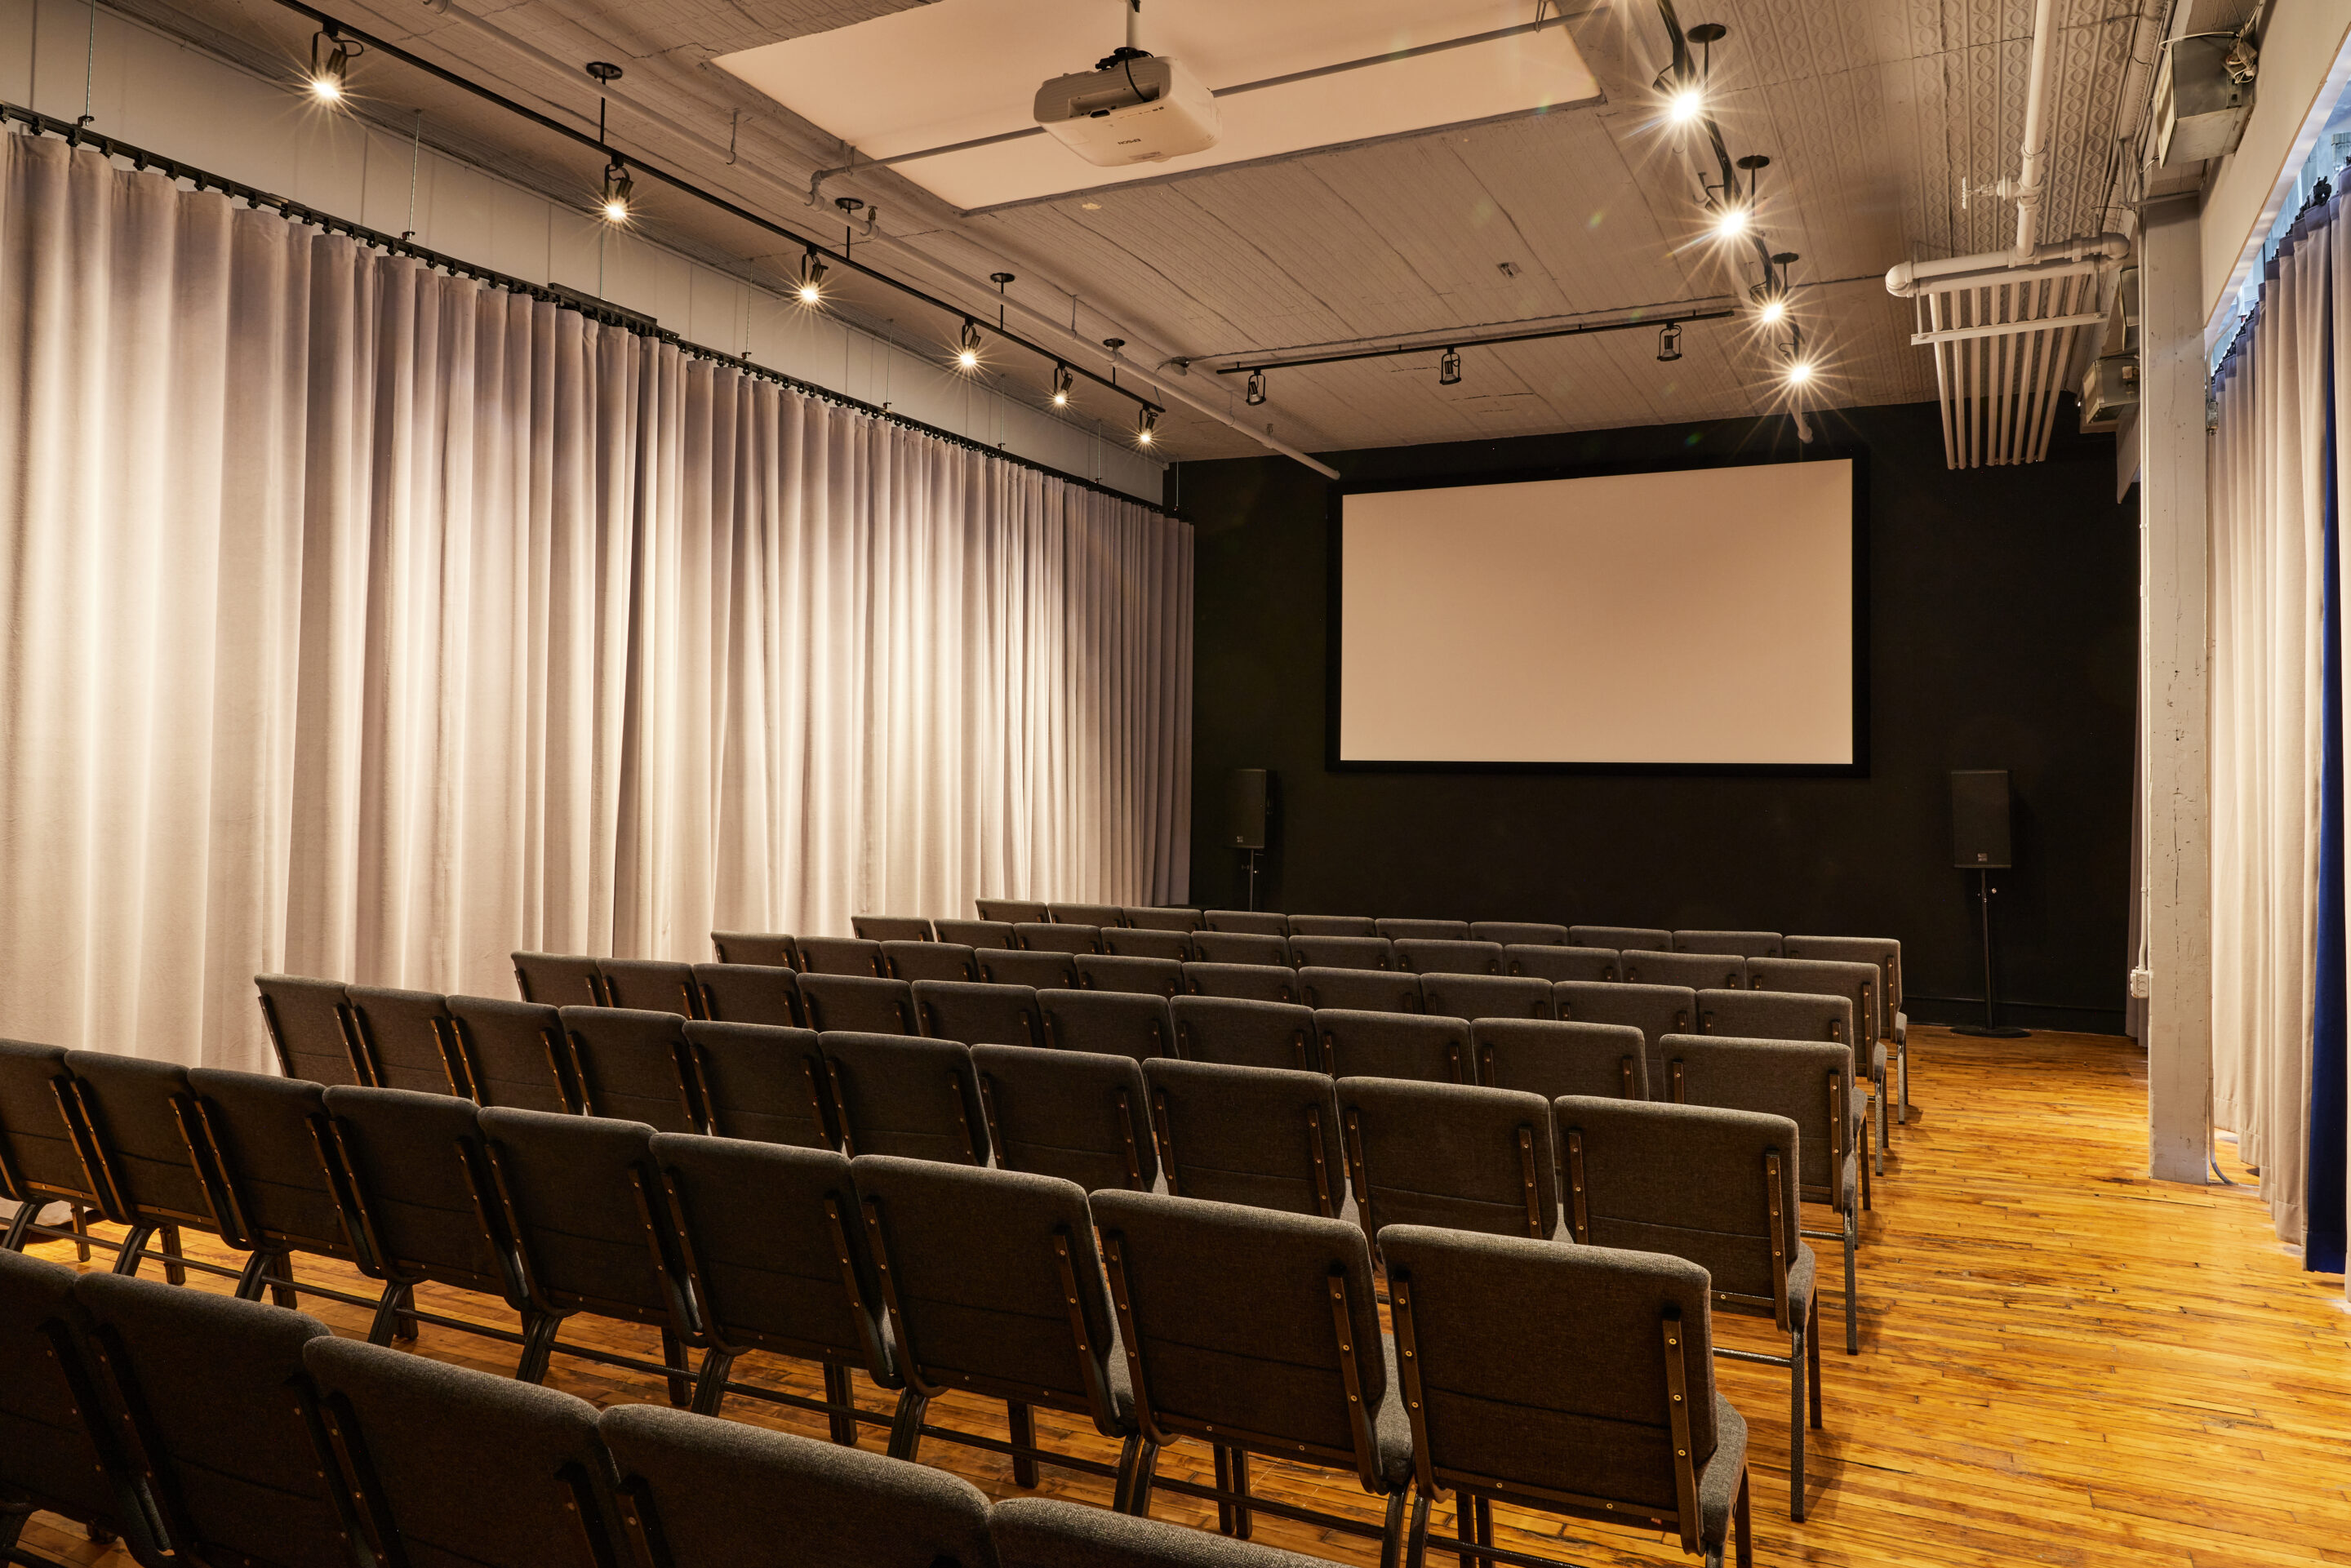 Casa Kino event space with chairs and projector screen